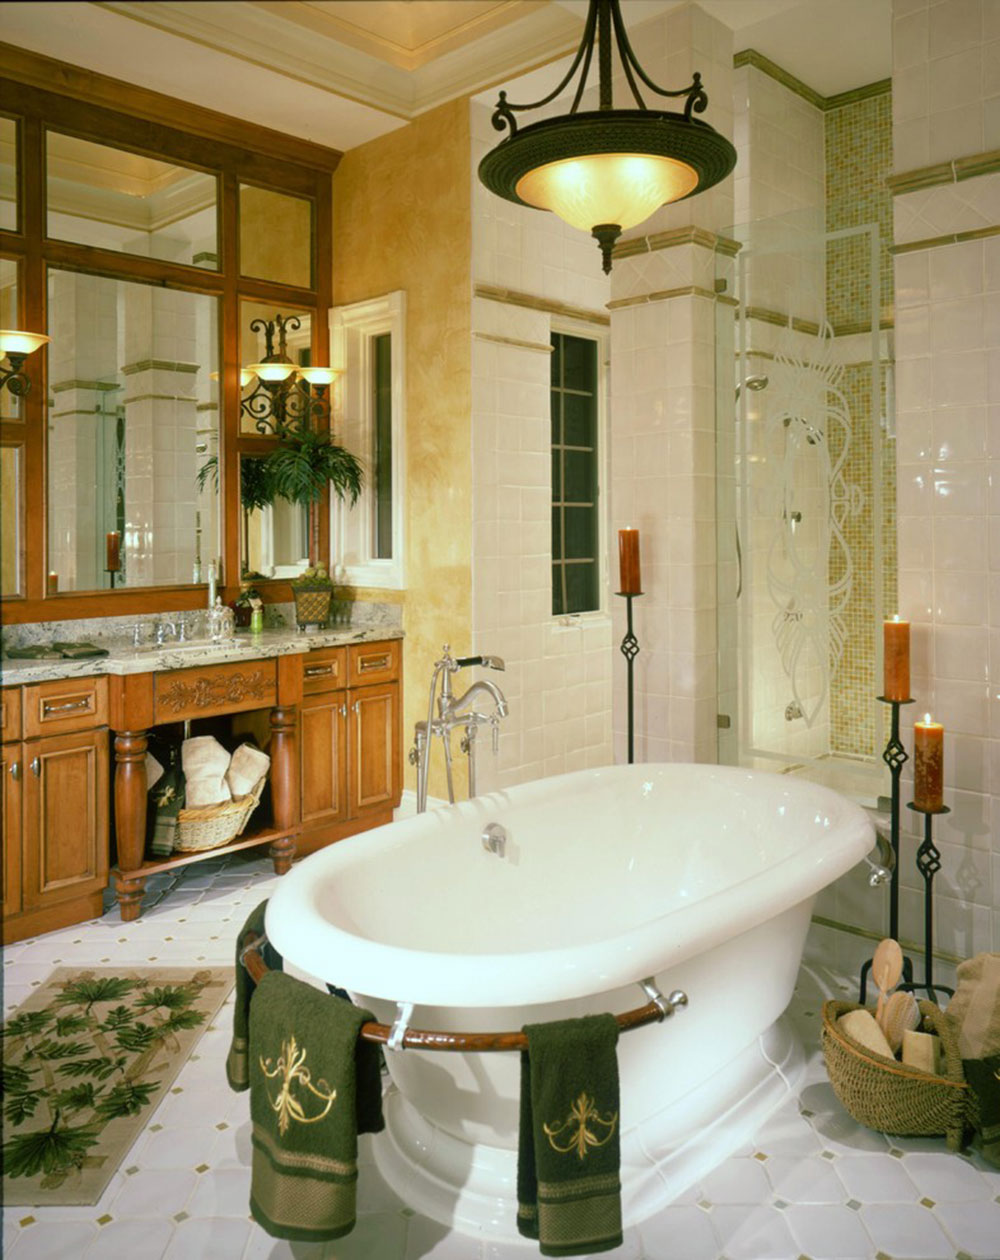 master-bath-by-Carleen-Young-Interior-Design The definitive guide on how to decorate a bathroom